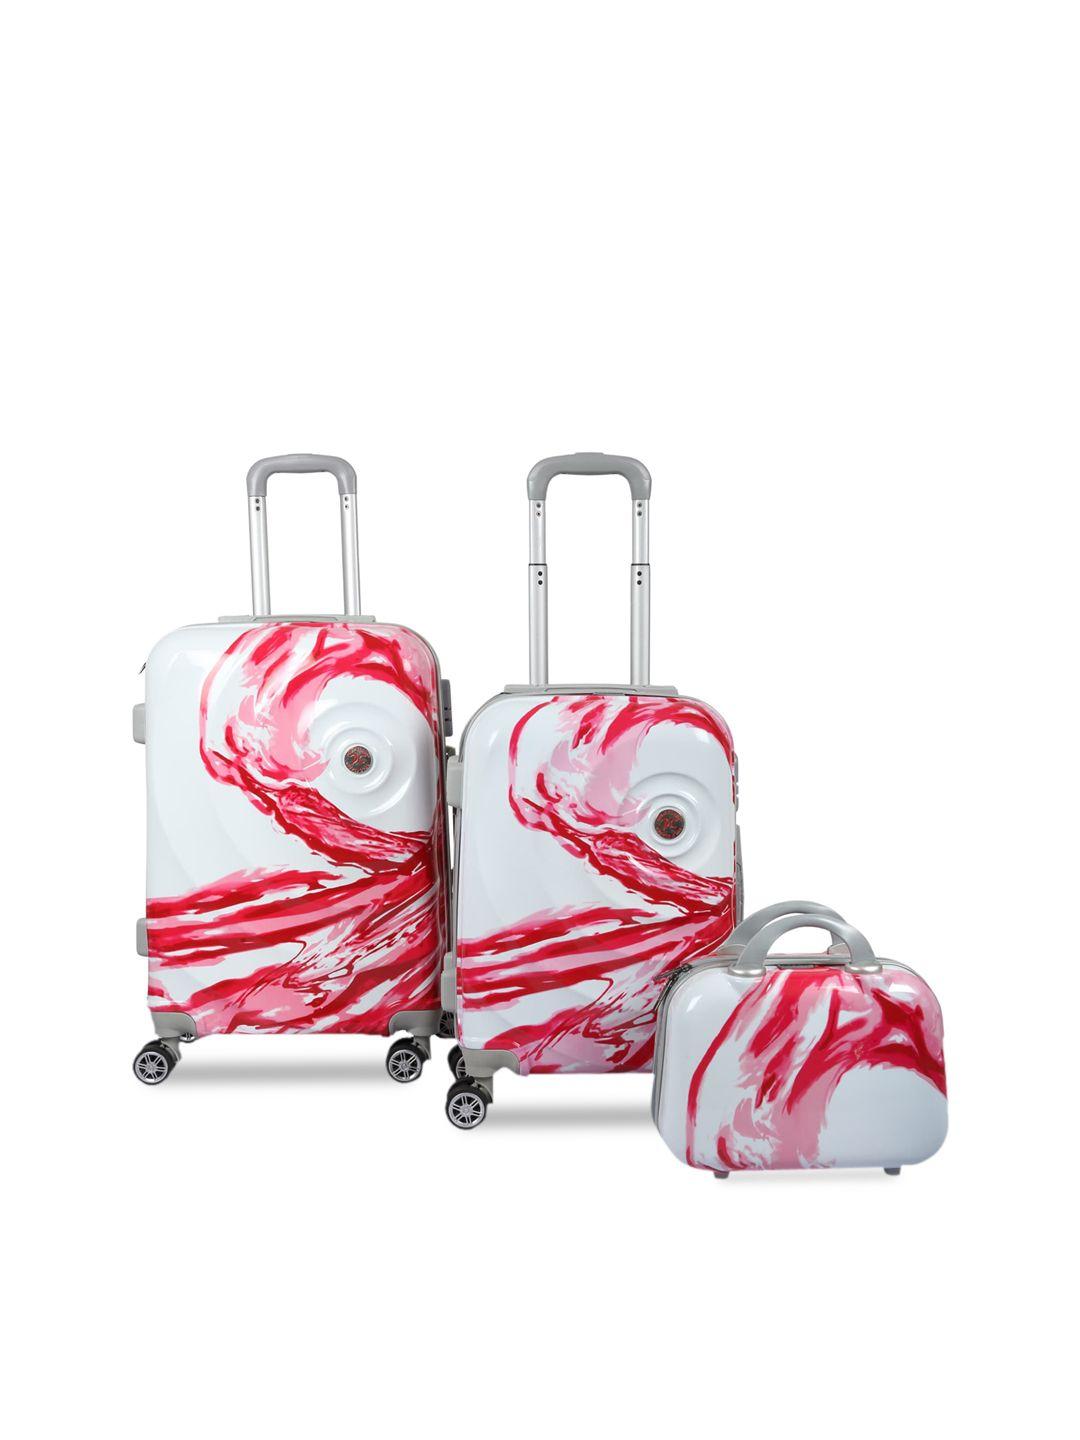 polo class red 2pc trolley bag set (20/28 inch) with 1pc vanity bag